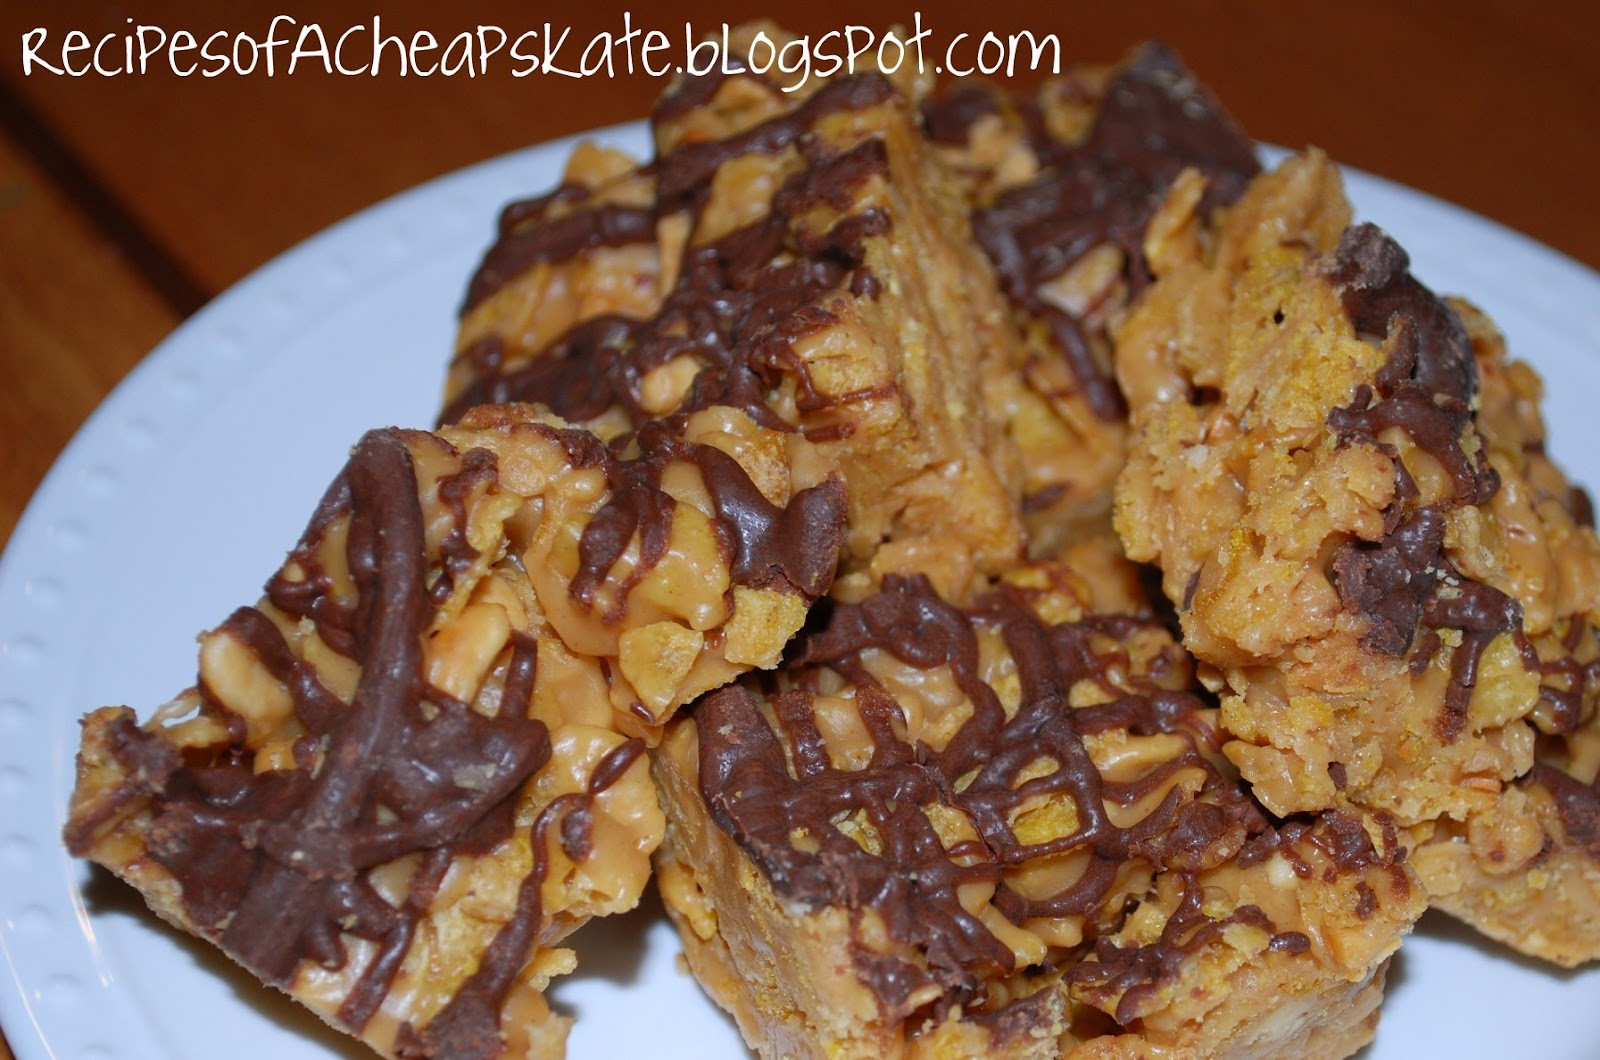 Peanut Butter Cornflake Cookies
 Recipes of a Cheapskate No Bake Peanut Butter Cornflake